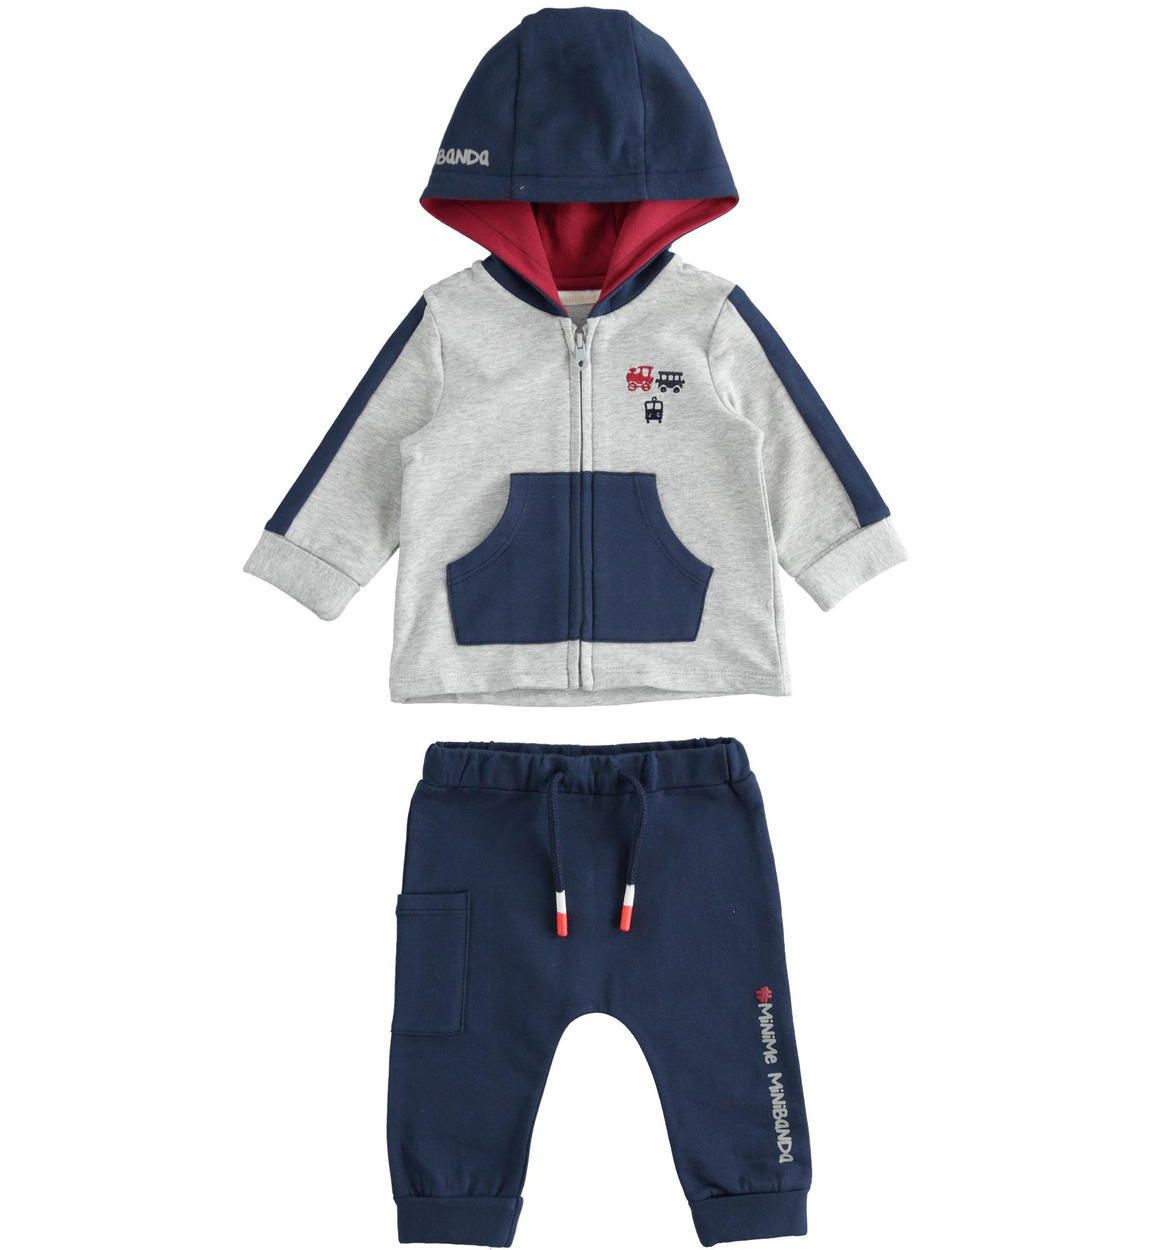 Boys Tracksuit Mothercare FAST Zipper Hoody Jog Suit 3 Months 6 Years 